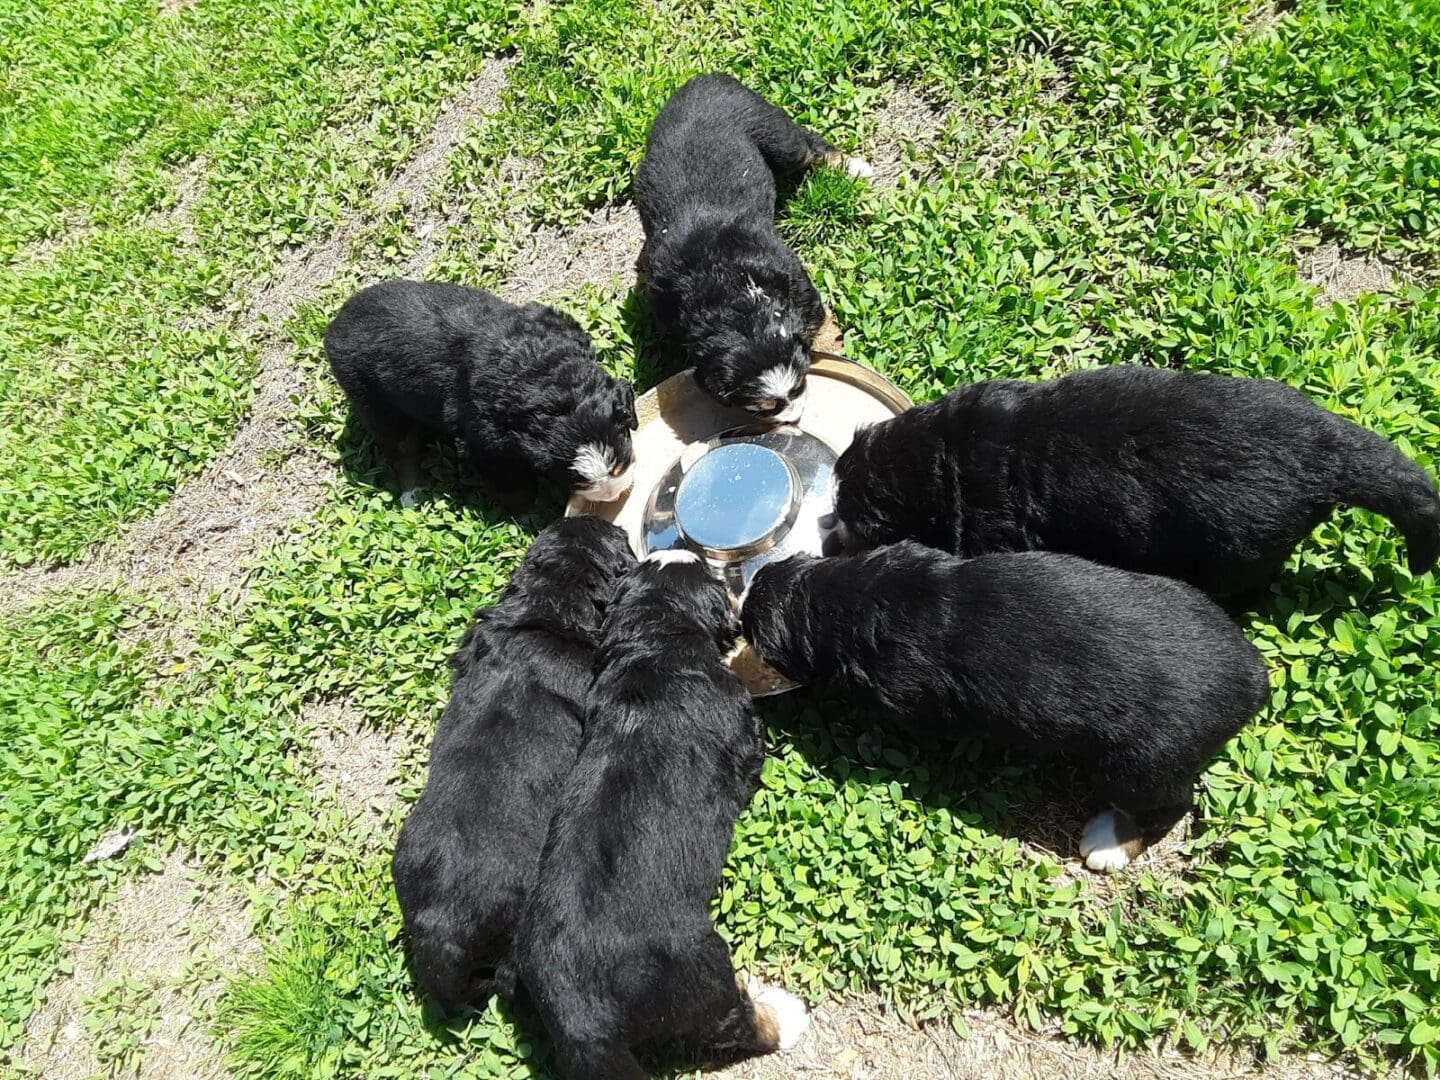 A group of black puppies eating from a plate.